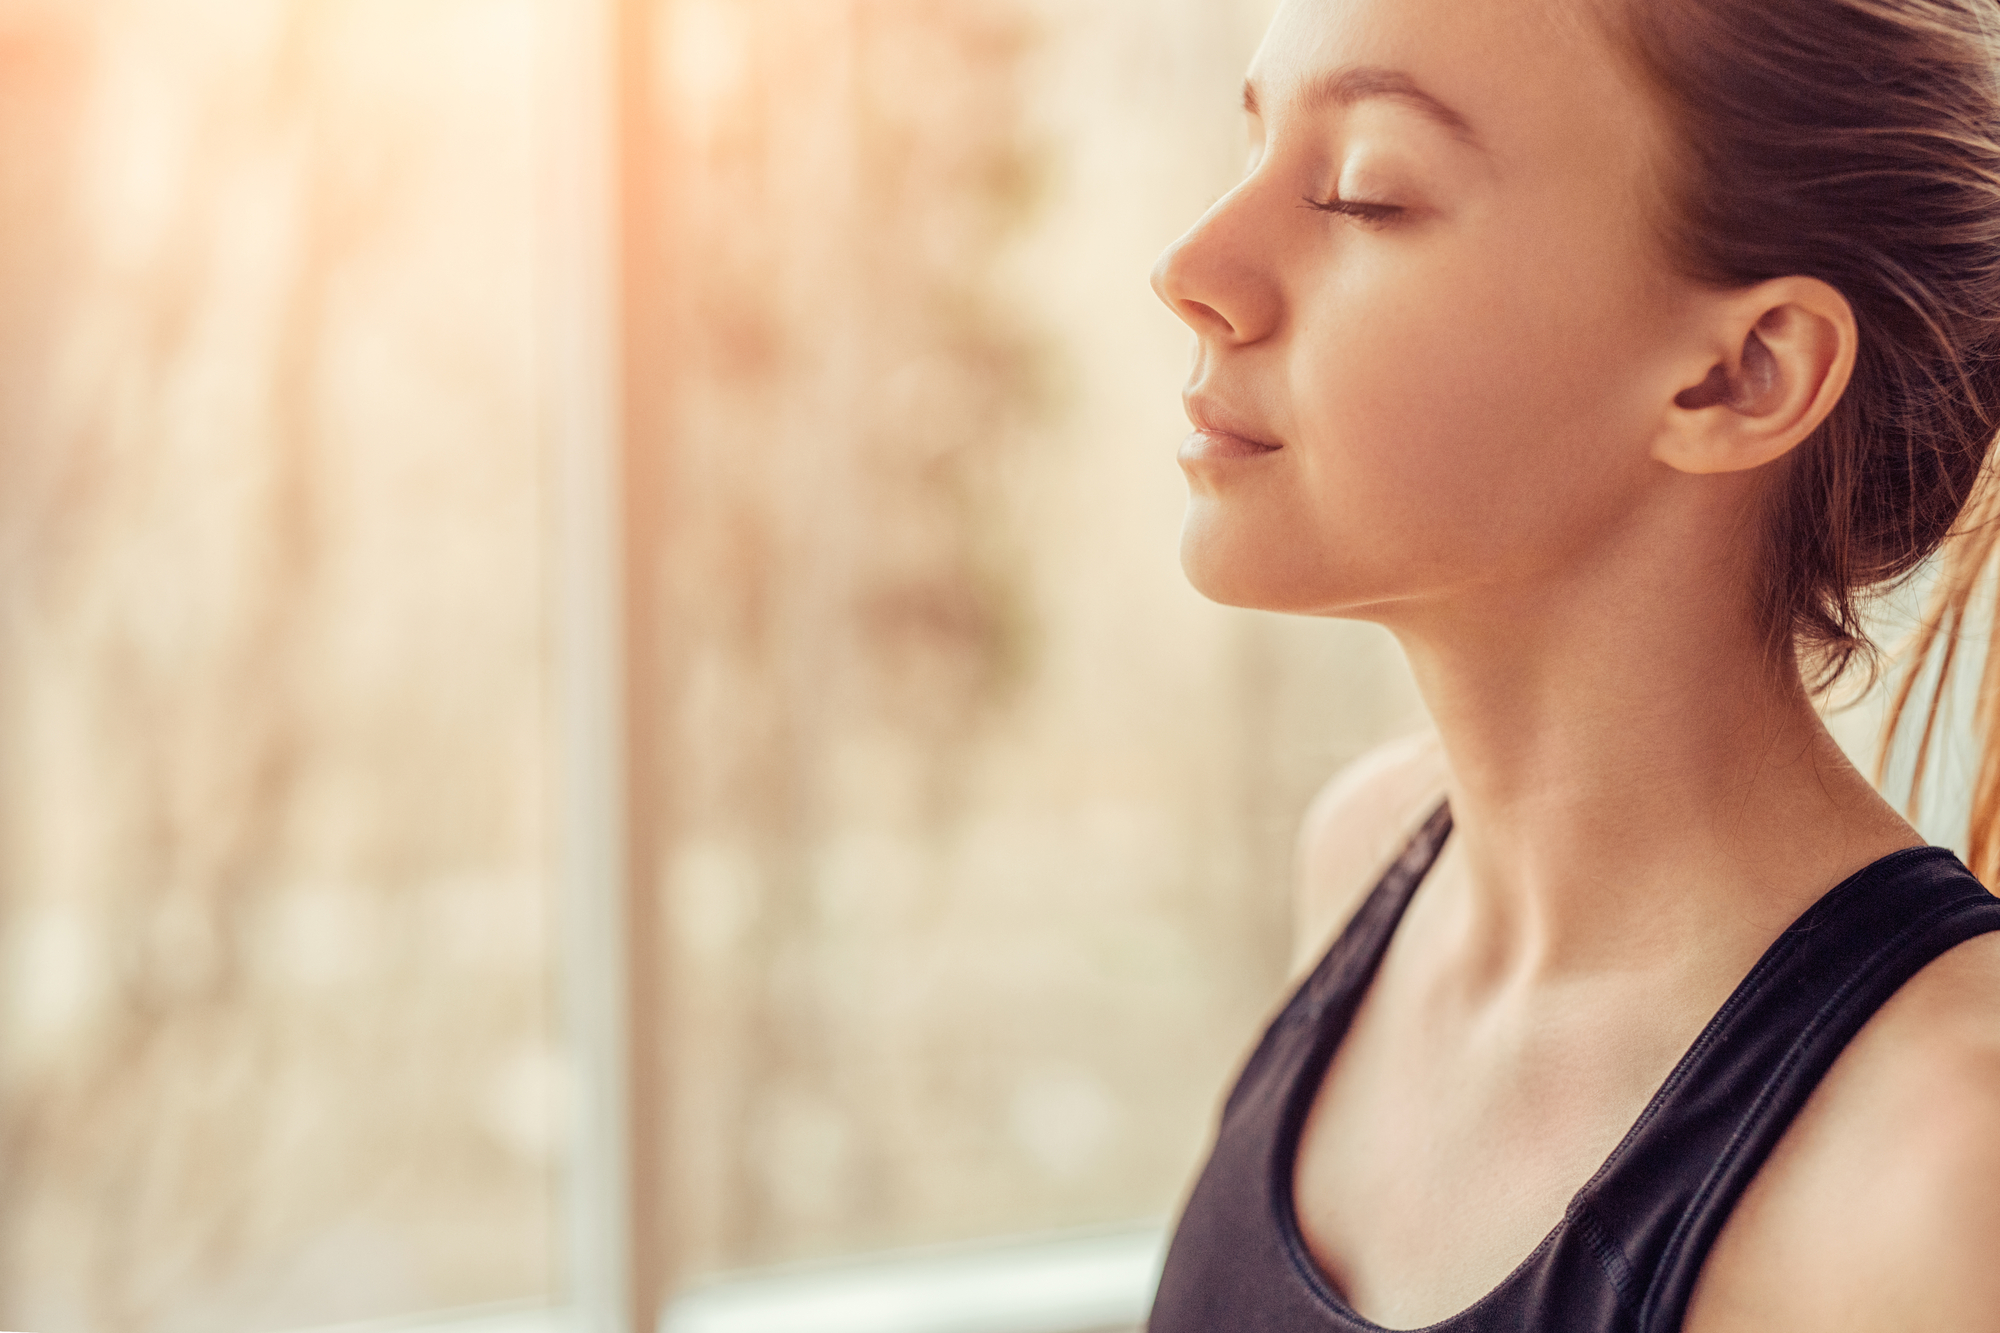 Woman practicing breathing for trauma trigger